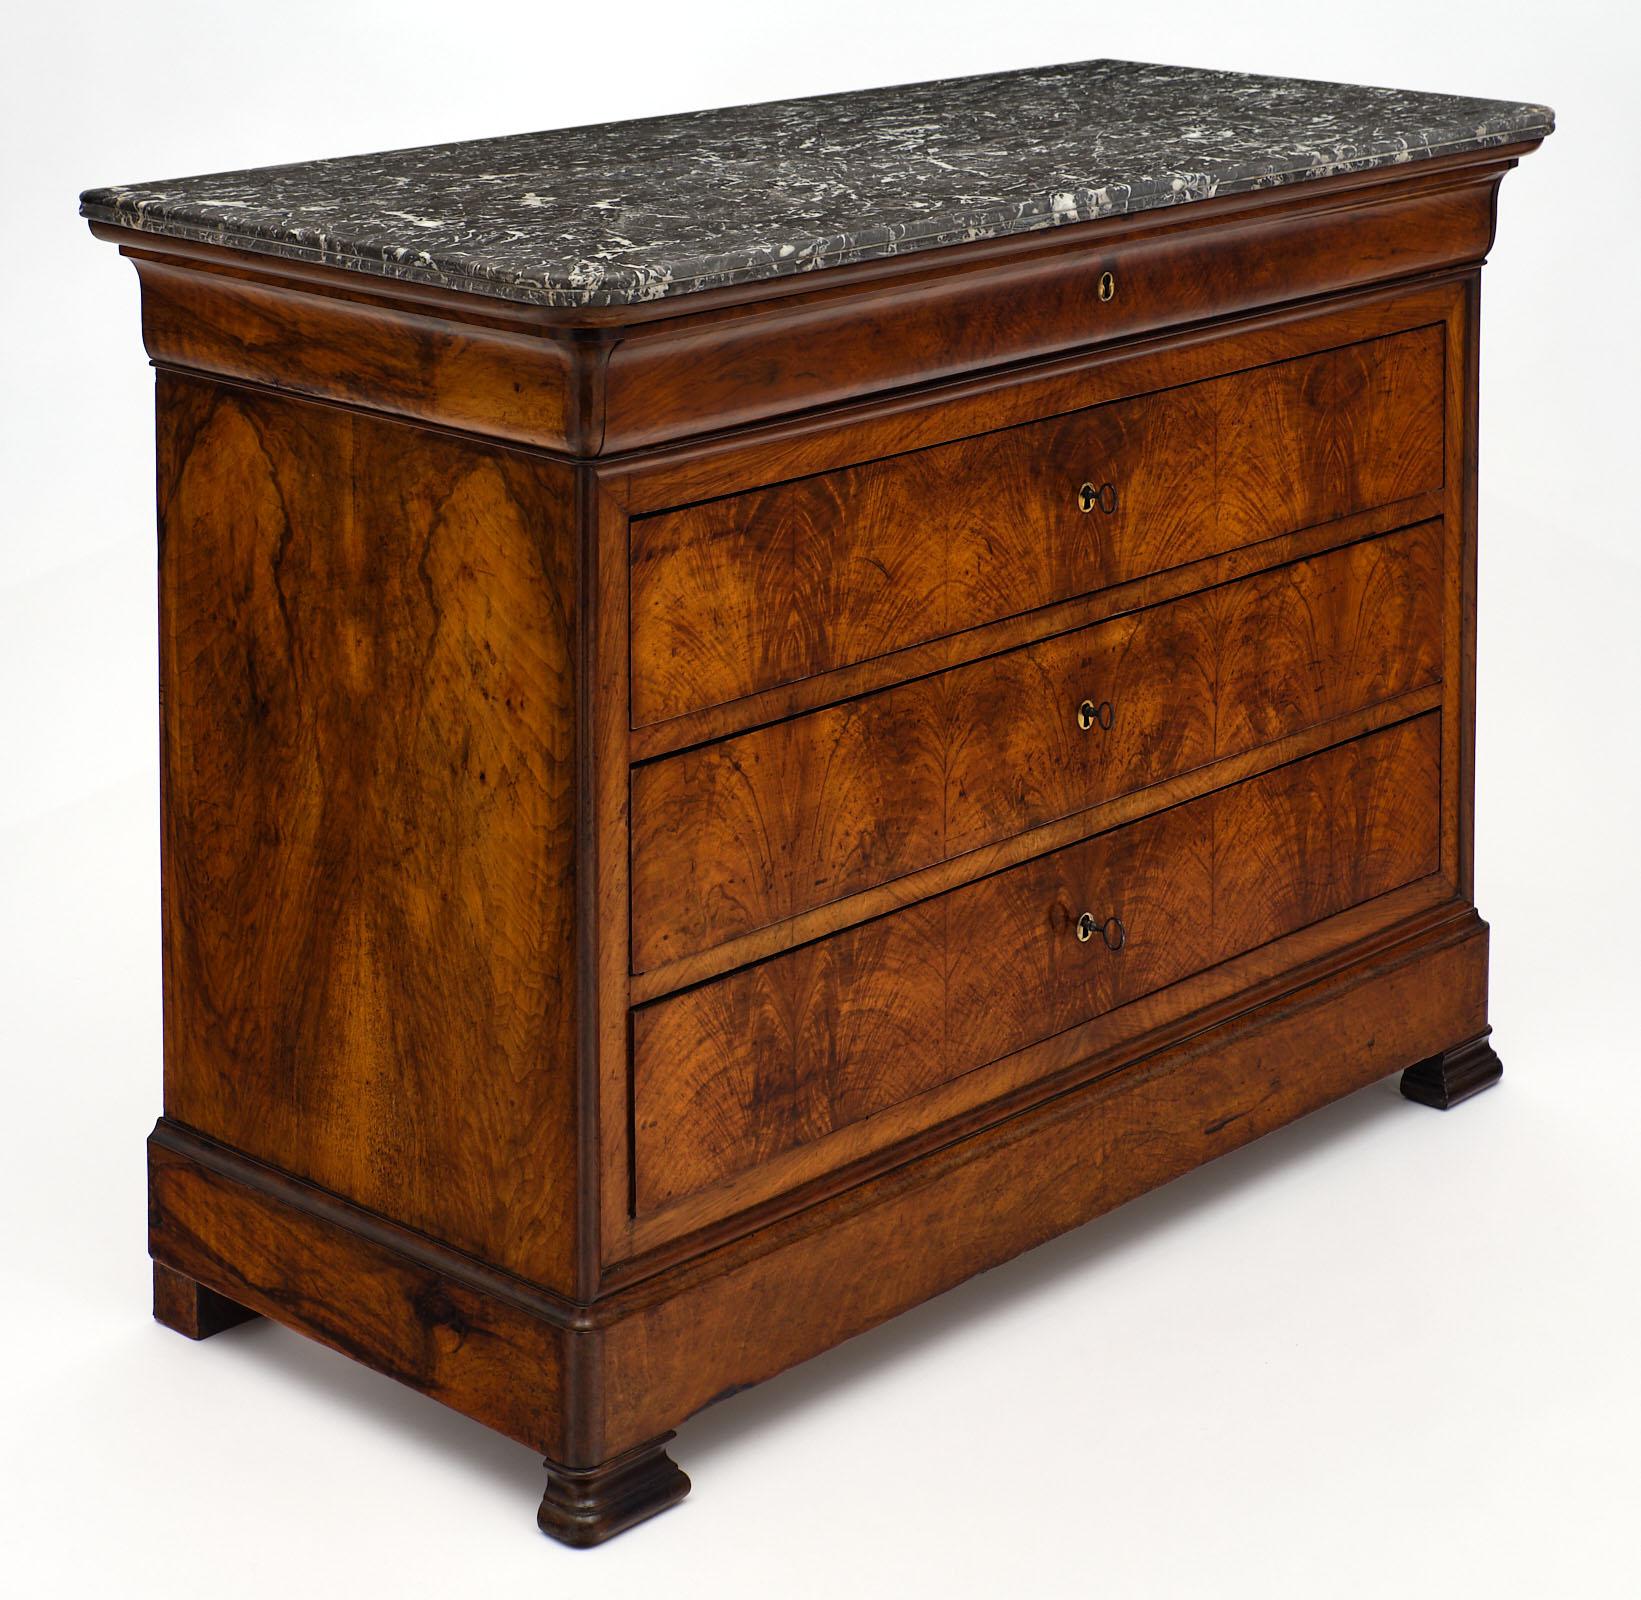 Louis Philippe antique French chest with marble top and four dovetailed drawers. This piece is made of solid walnut with veneered figured walnut on the facade. It is finished with a light French polish and waxed. We loved the intact Saint Anne